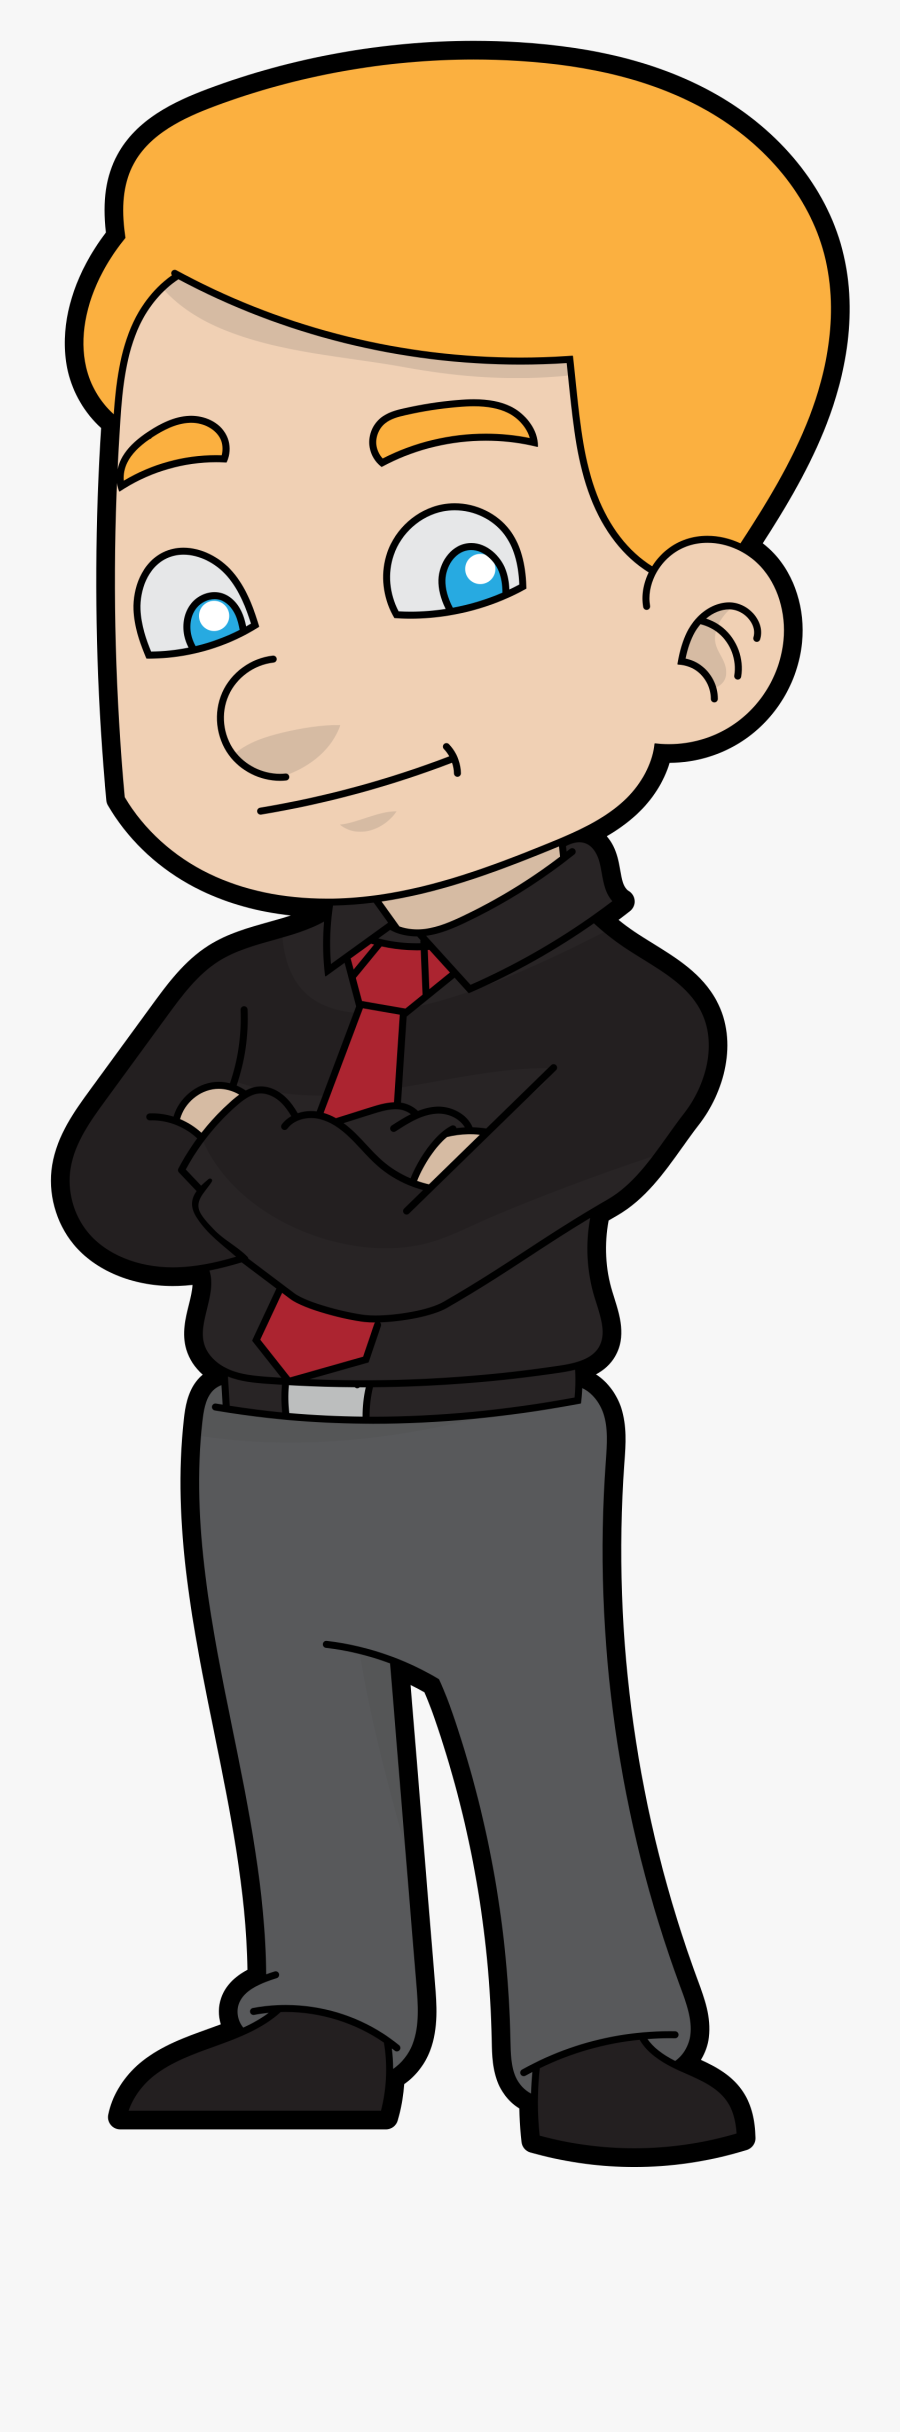 File Nice And Friendly - Clipart Businessman Cartoon, Transparent Clipart